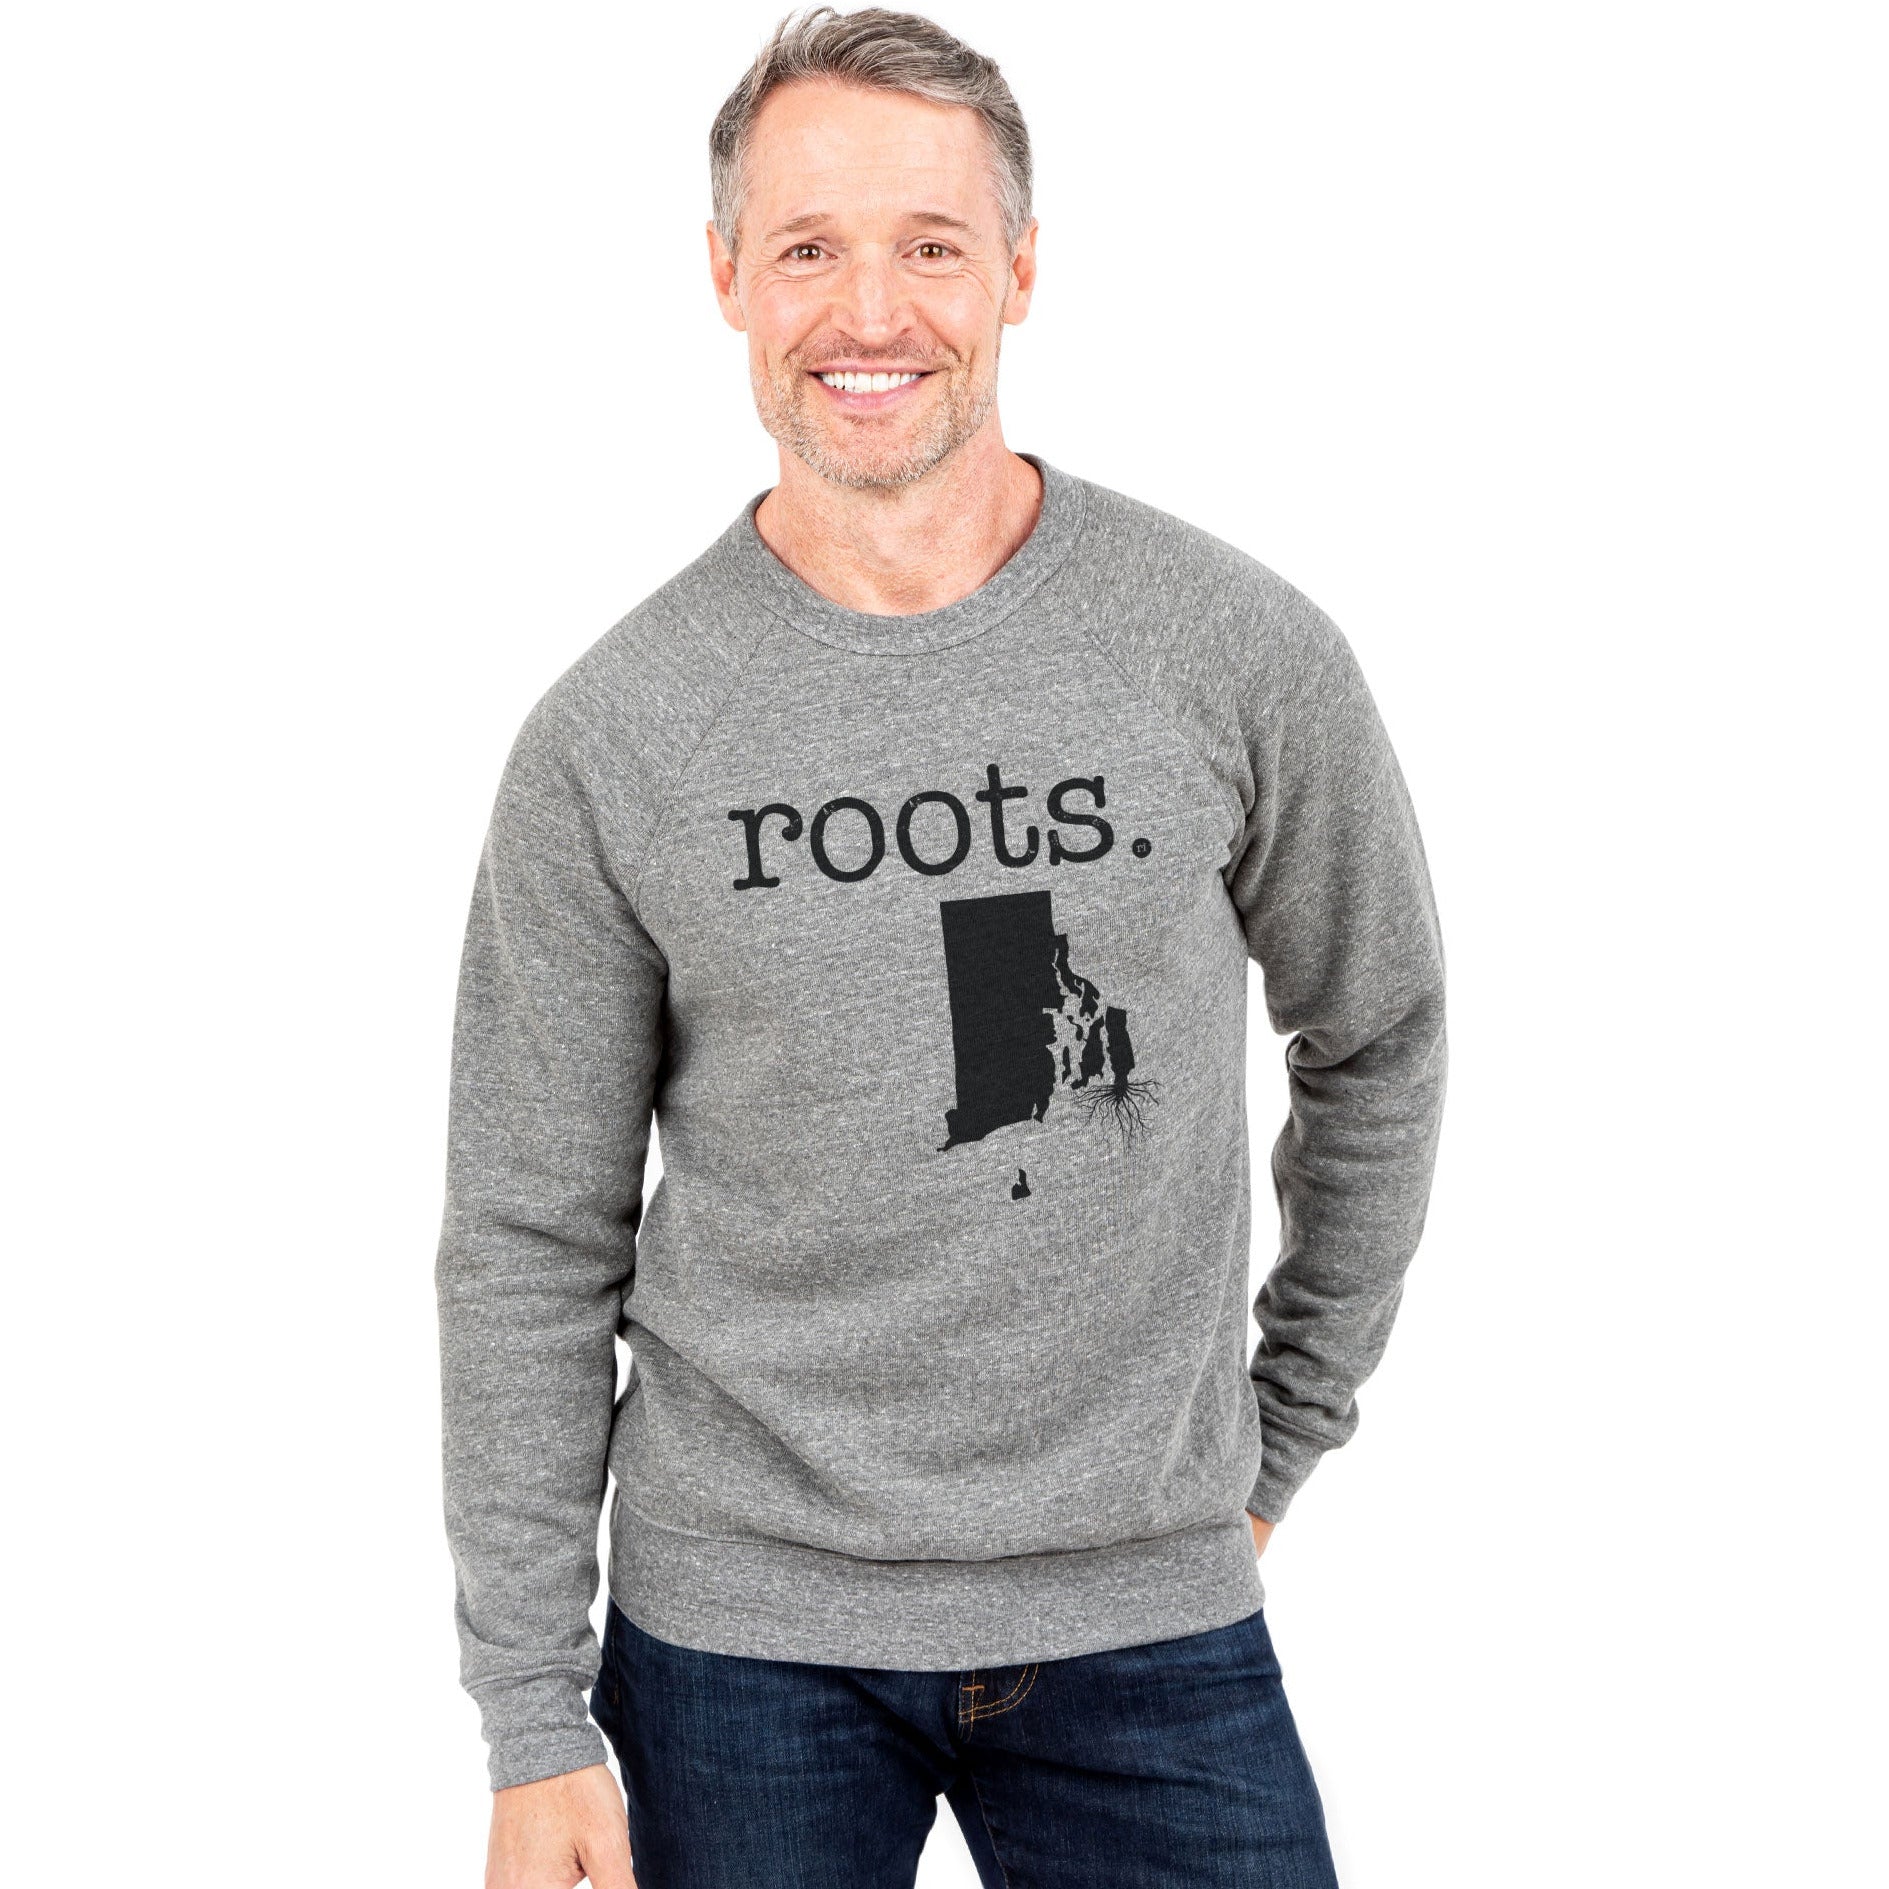 Roots State Rhode Island - Stories You Can Wear